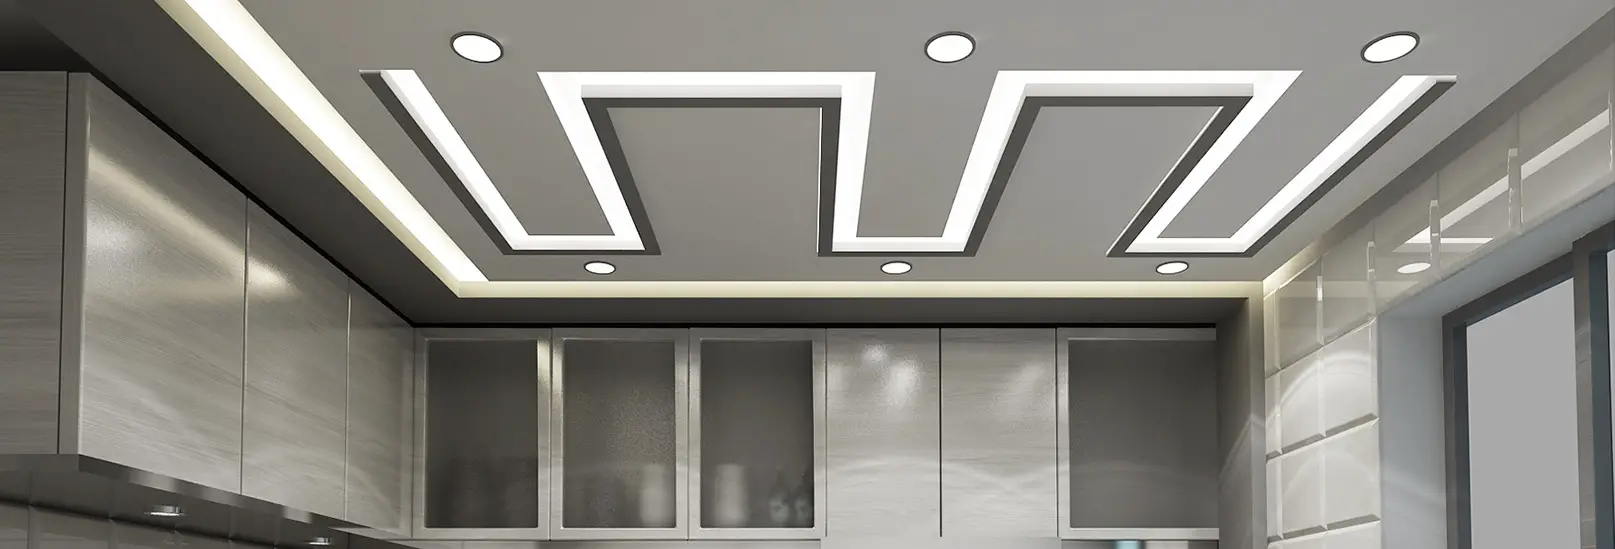 Types Of Kitchen Ceilings